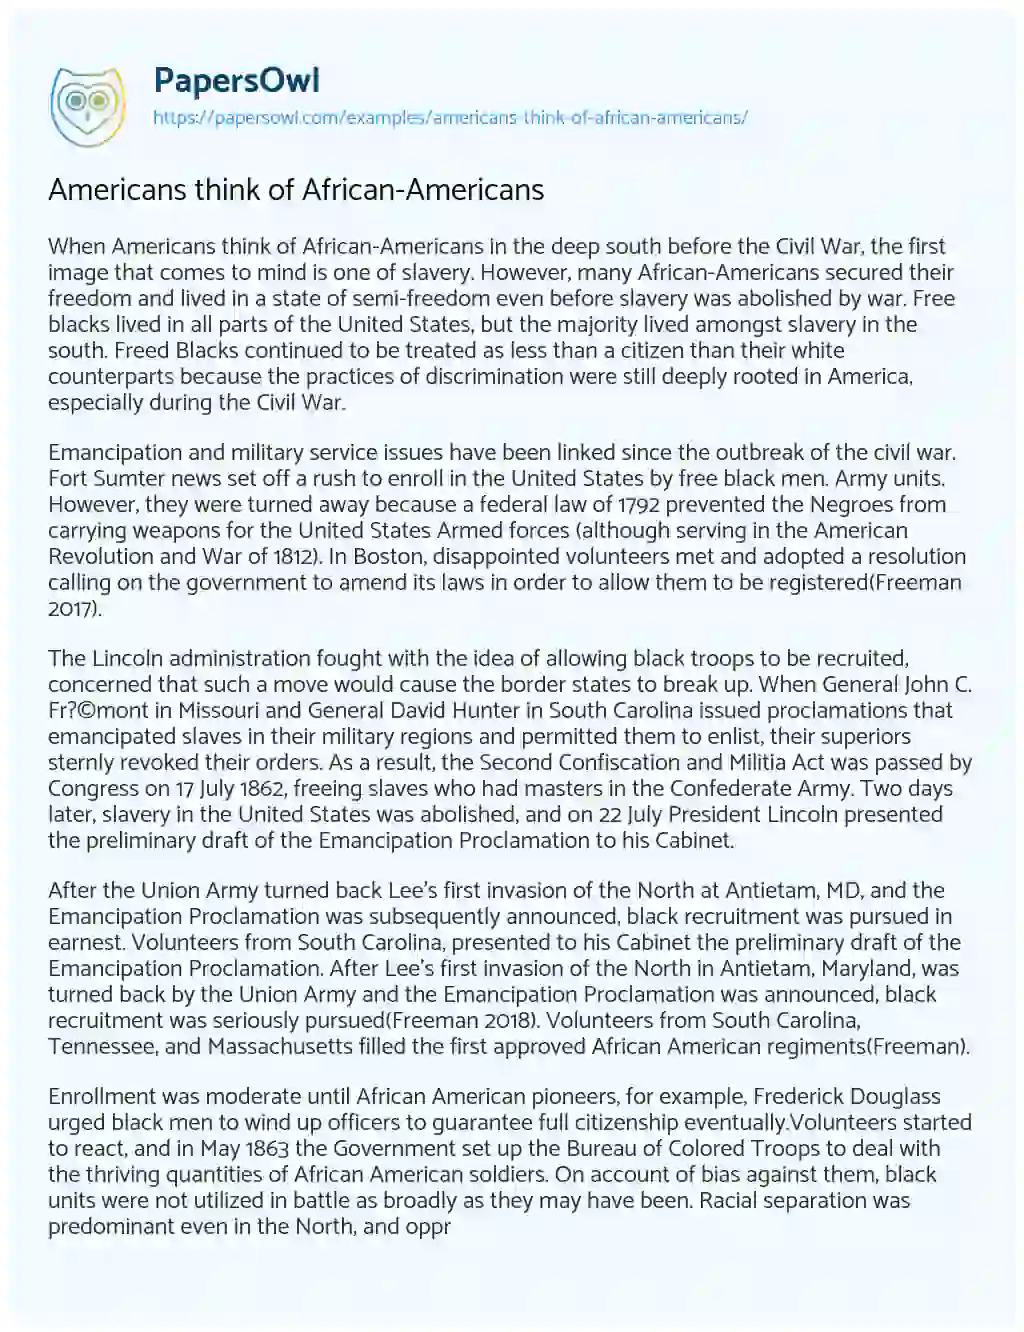 Americans Think of African-Americans essay